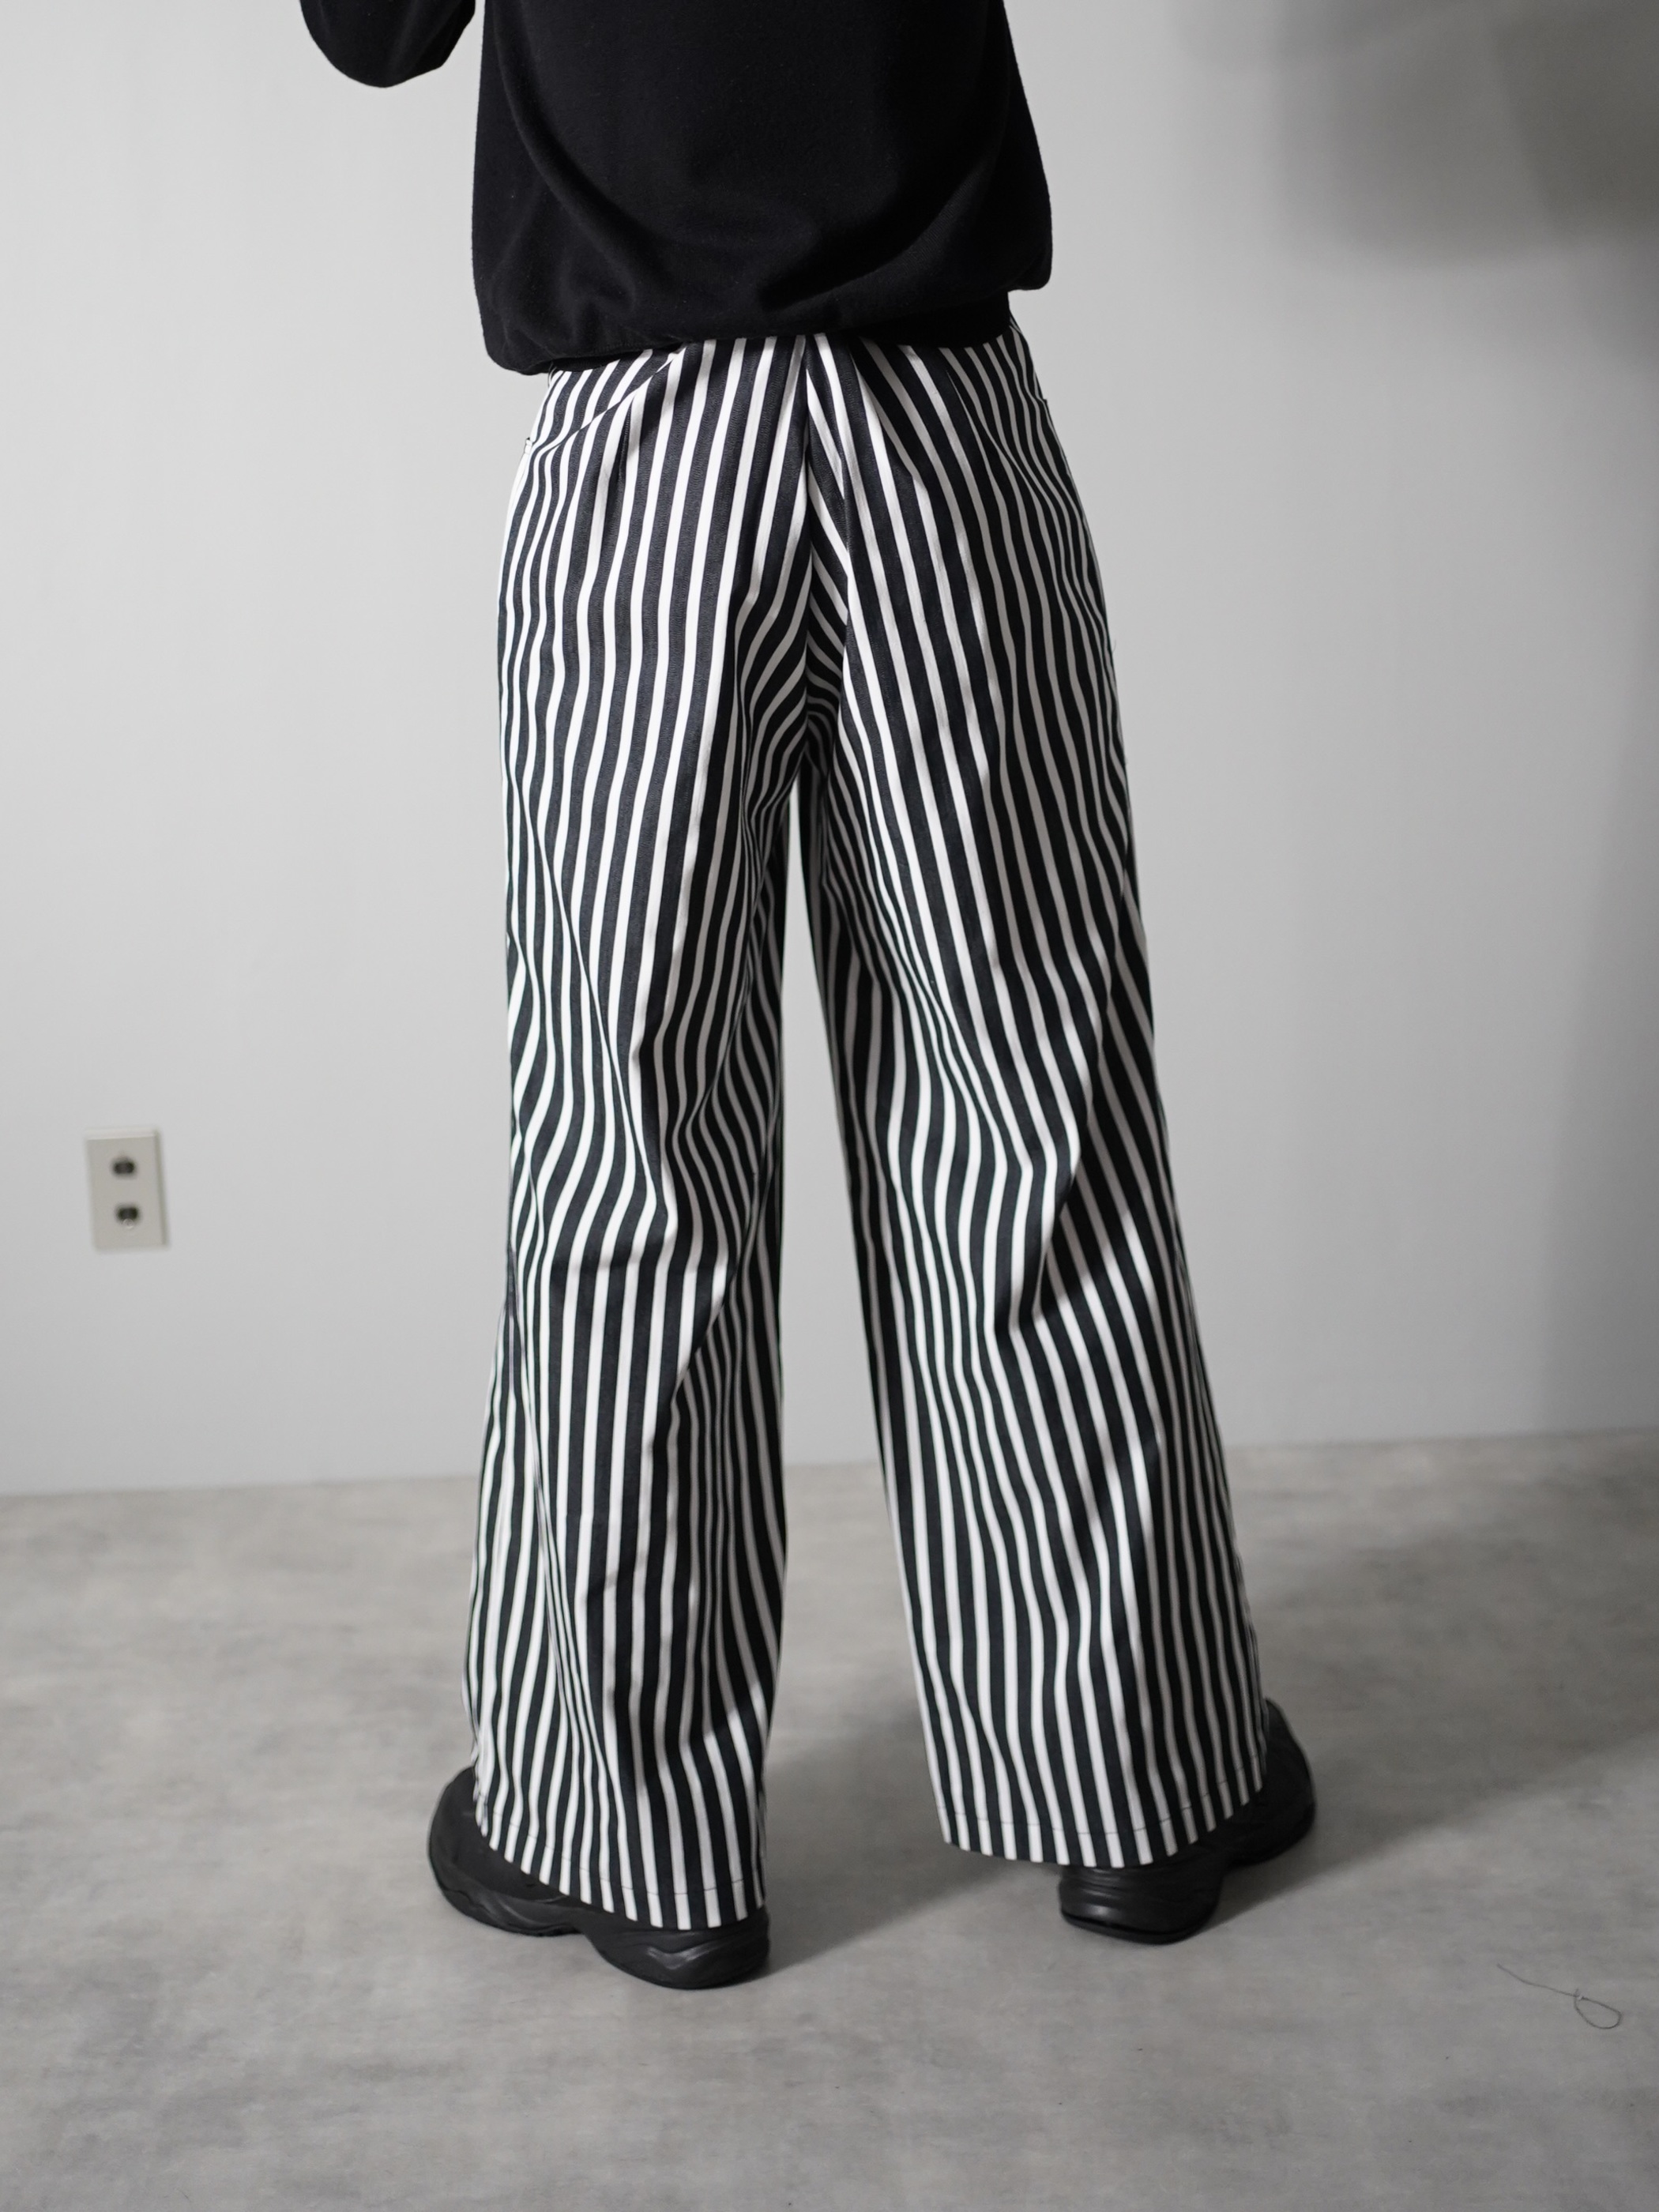 00's Poly cotton wide flare pants / Dead stock